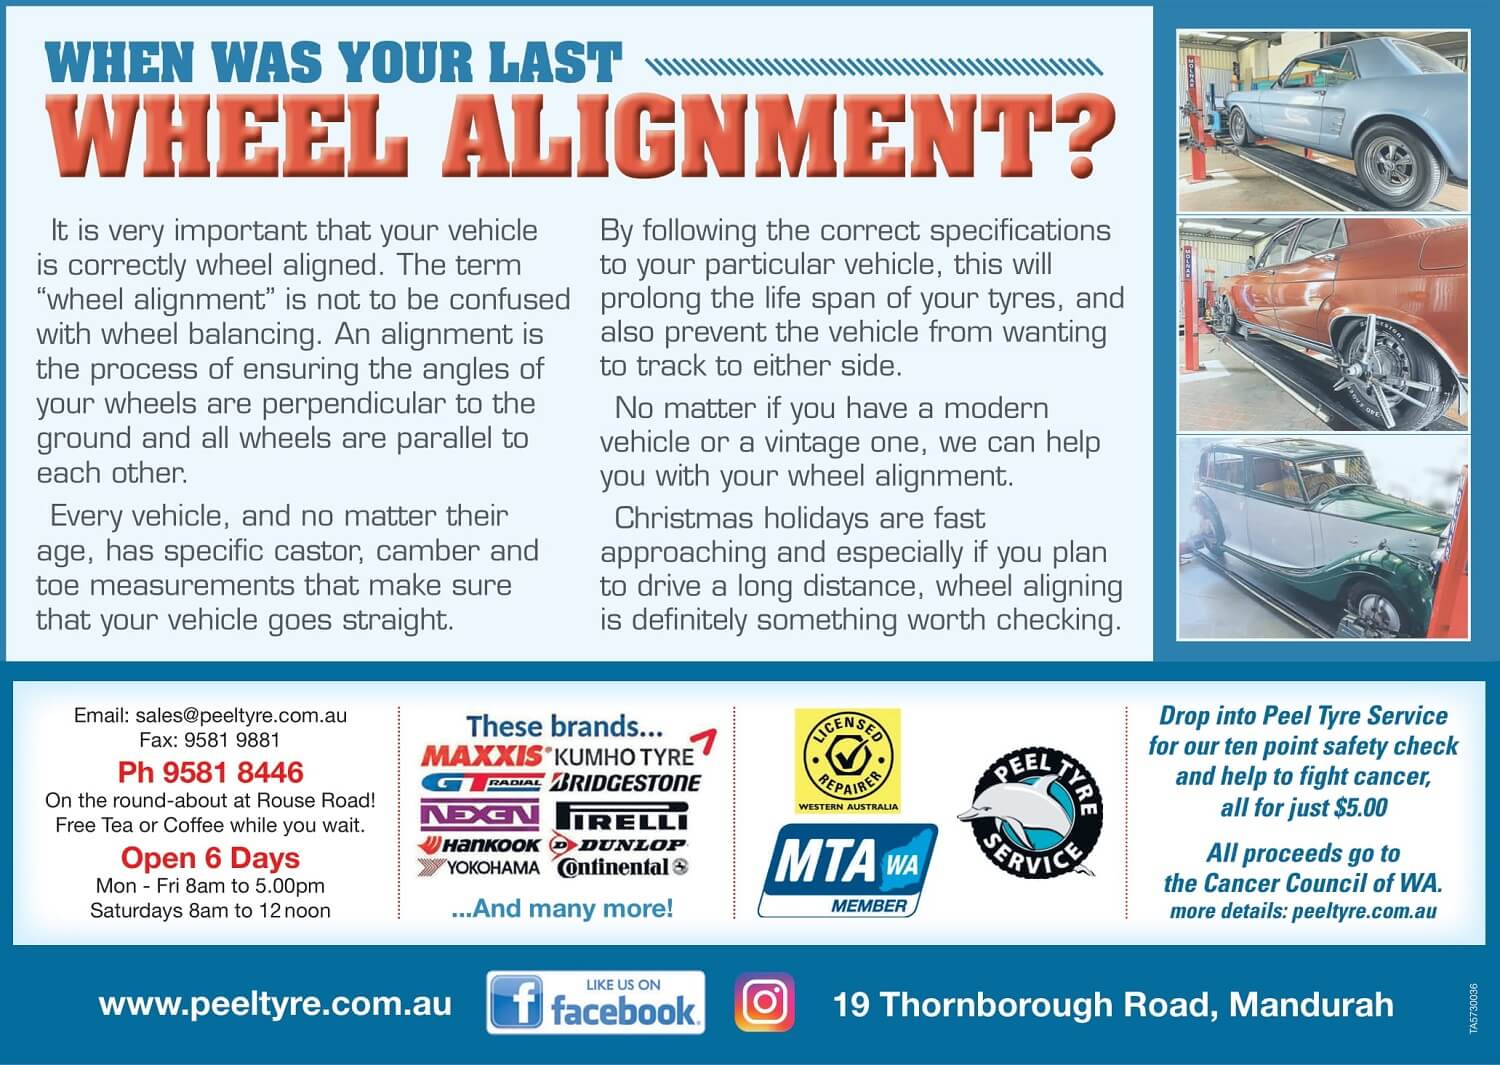 When was your last wheel alignment?